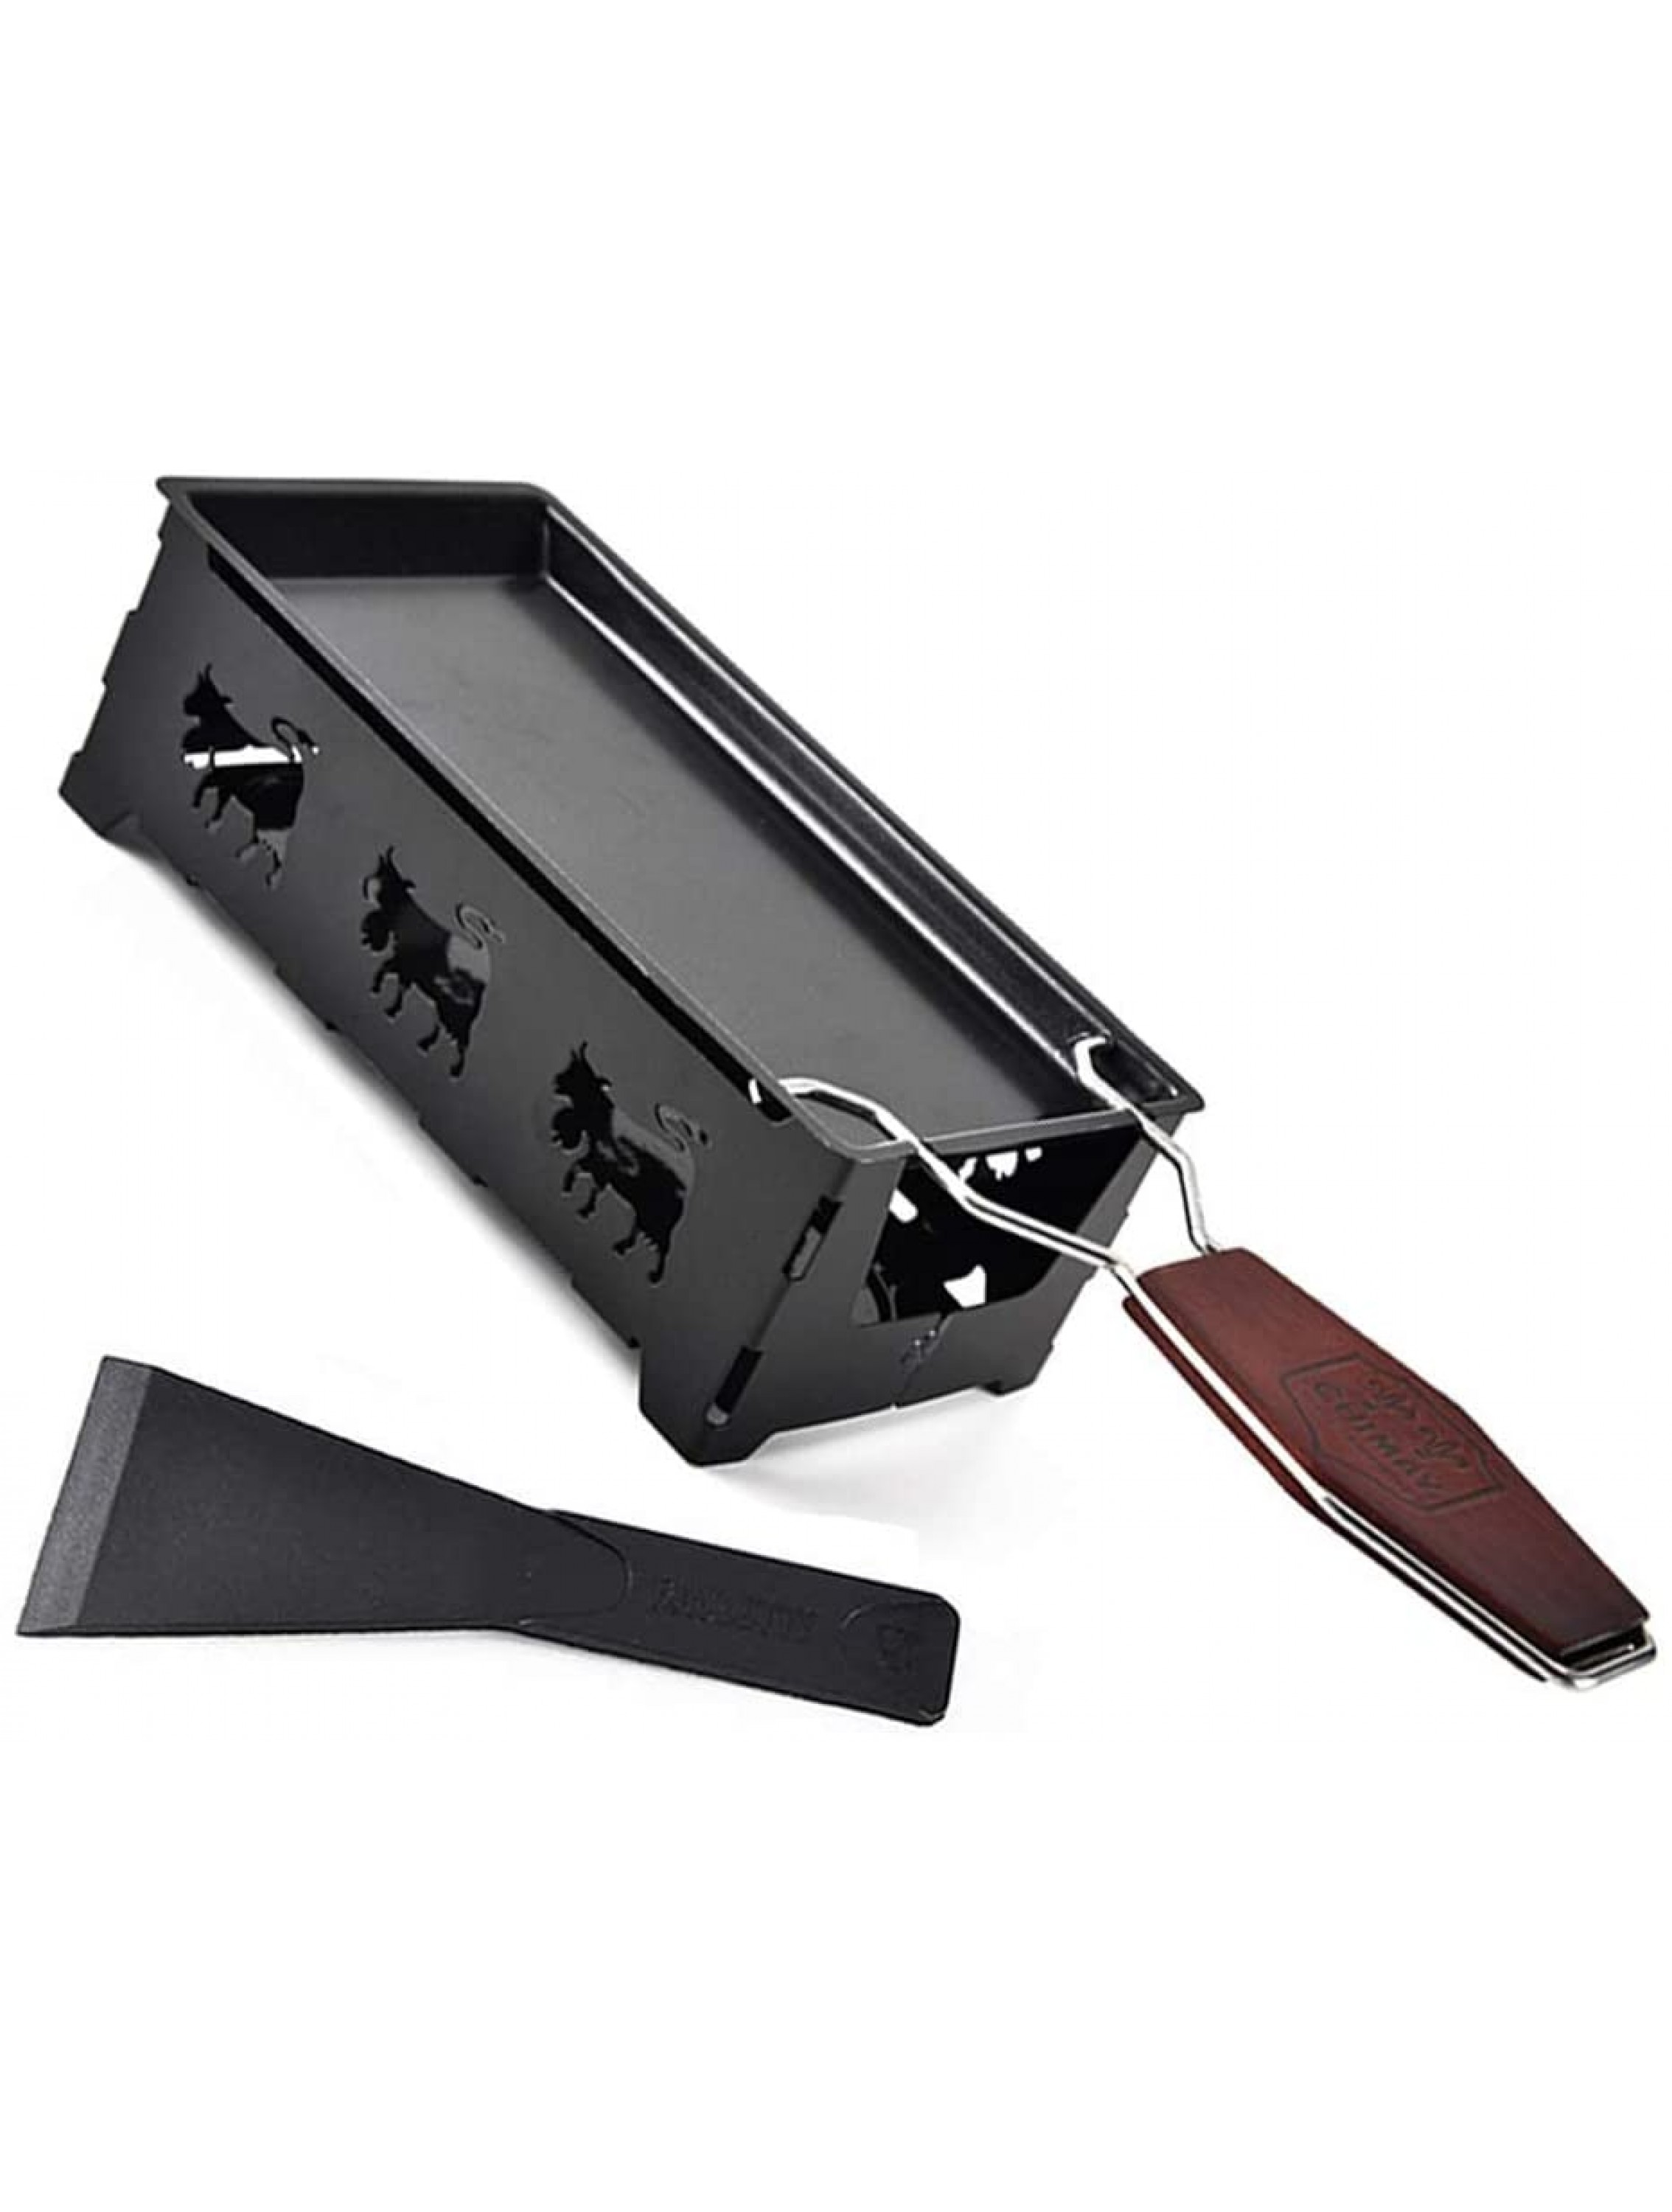 Mini Cheese Melter Stainless Steel Cheese Oven Fondue Set Wooden Handle Heat Resistant Cream Chocolate Baking Tray Fondue Pot Set Color : Black - BSVZYL41T